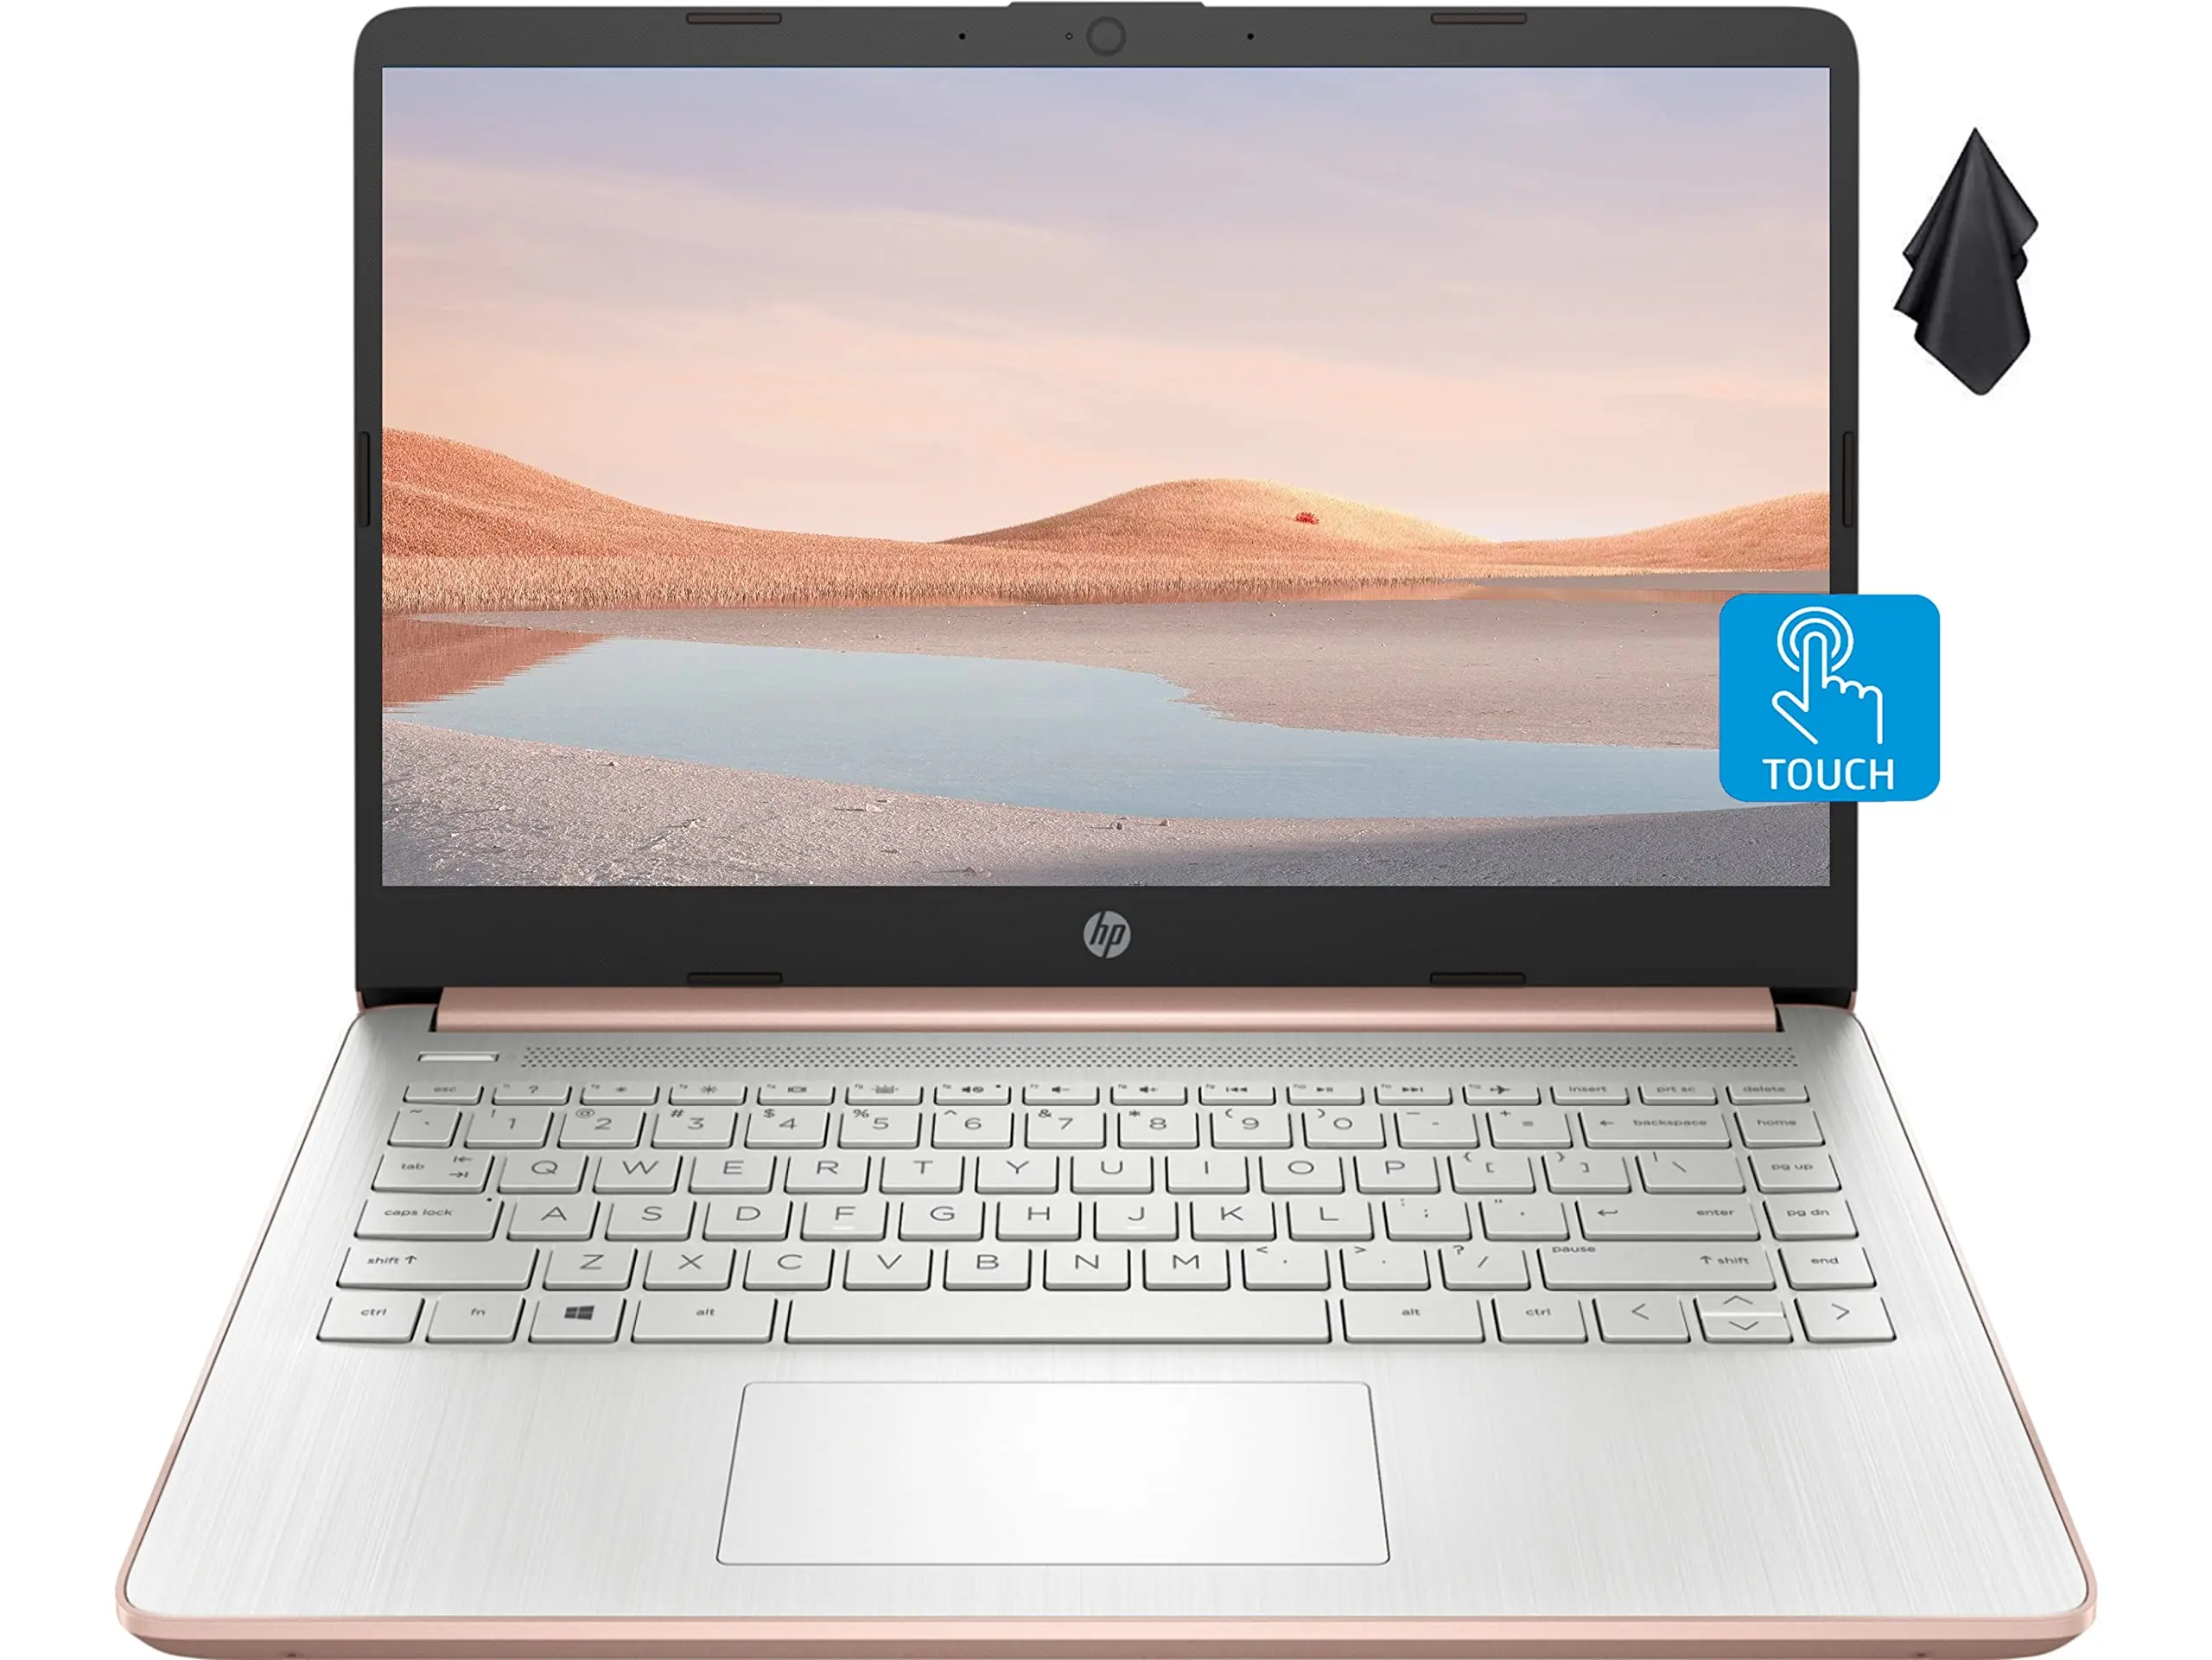 hewlett packard pavilion size - How big is the HP Pavilion 15.6 inch laptop